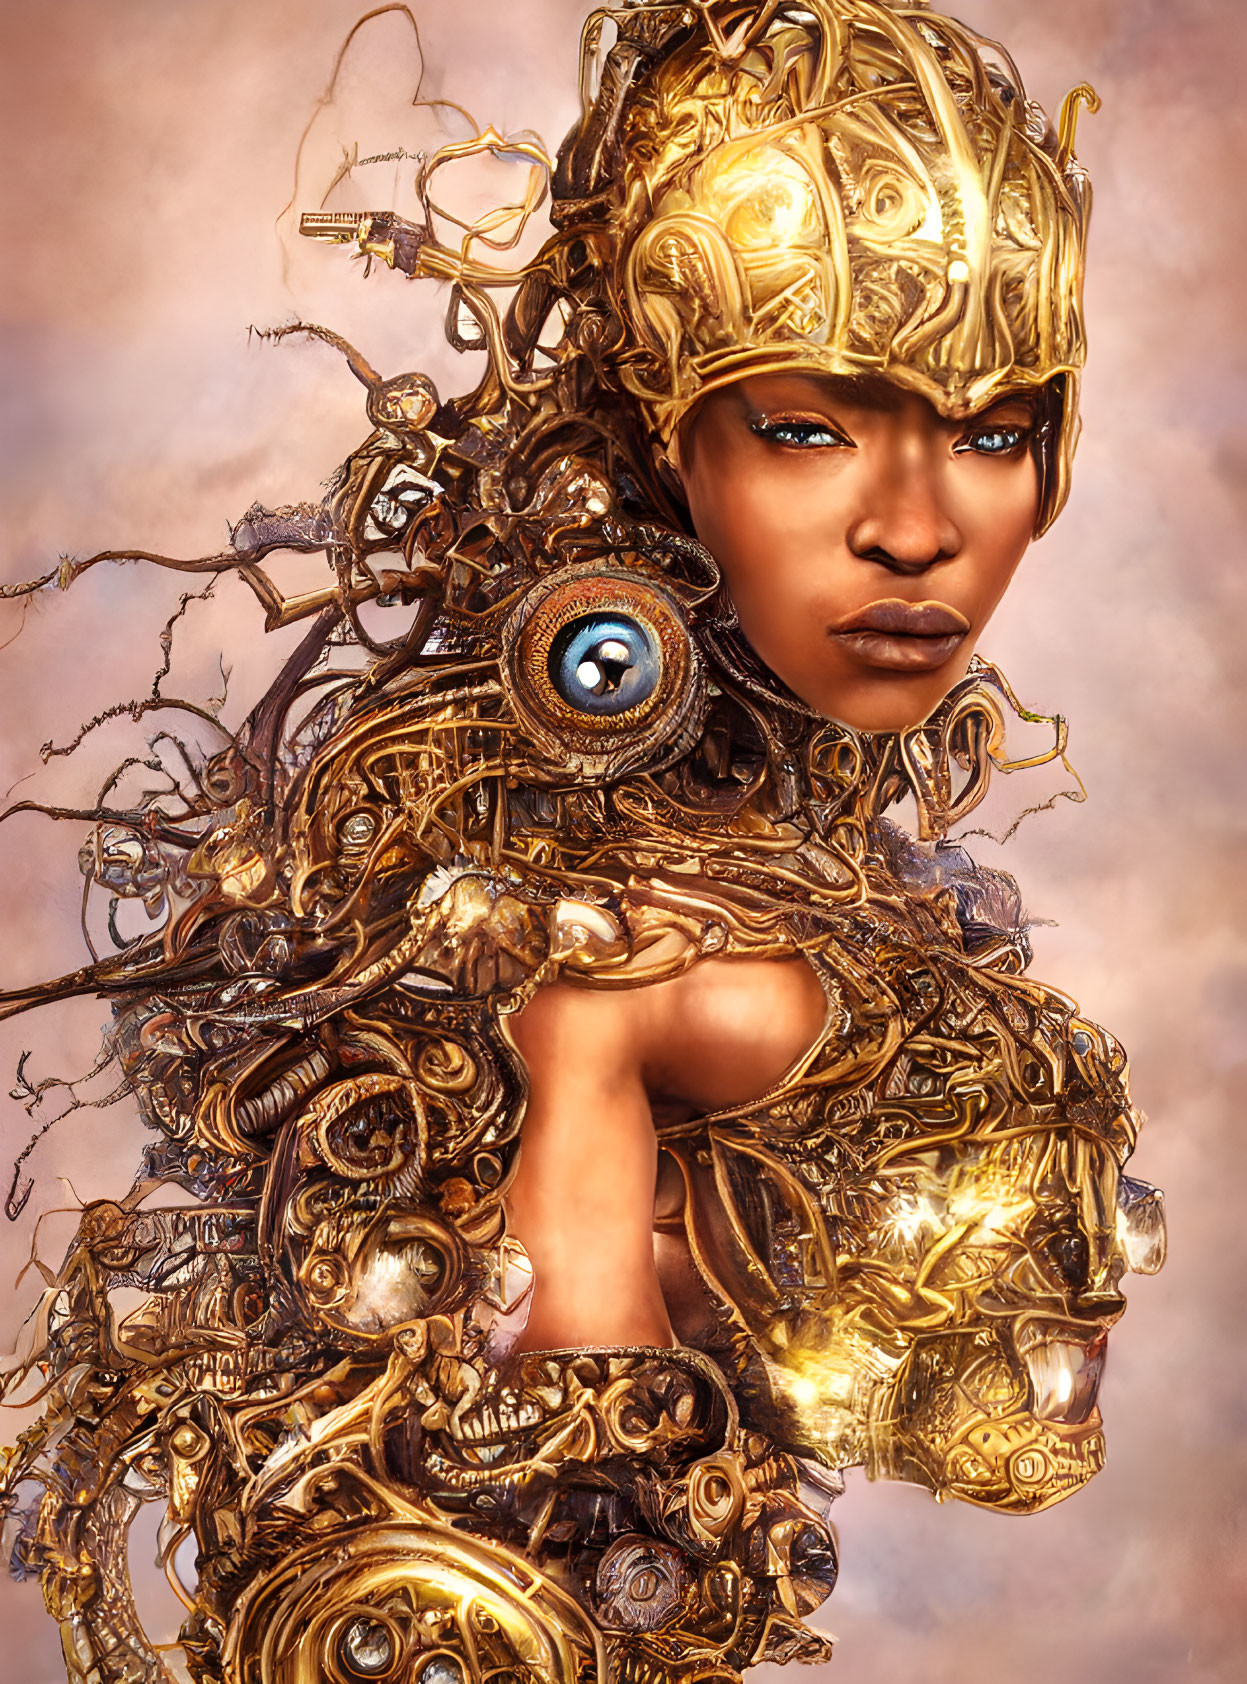 Golden mechanical humanoid figure with intricate clockwork designs and embedded eye.